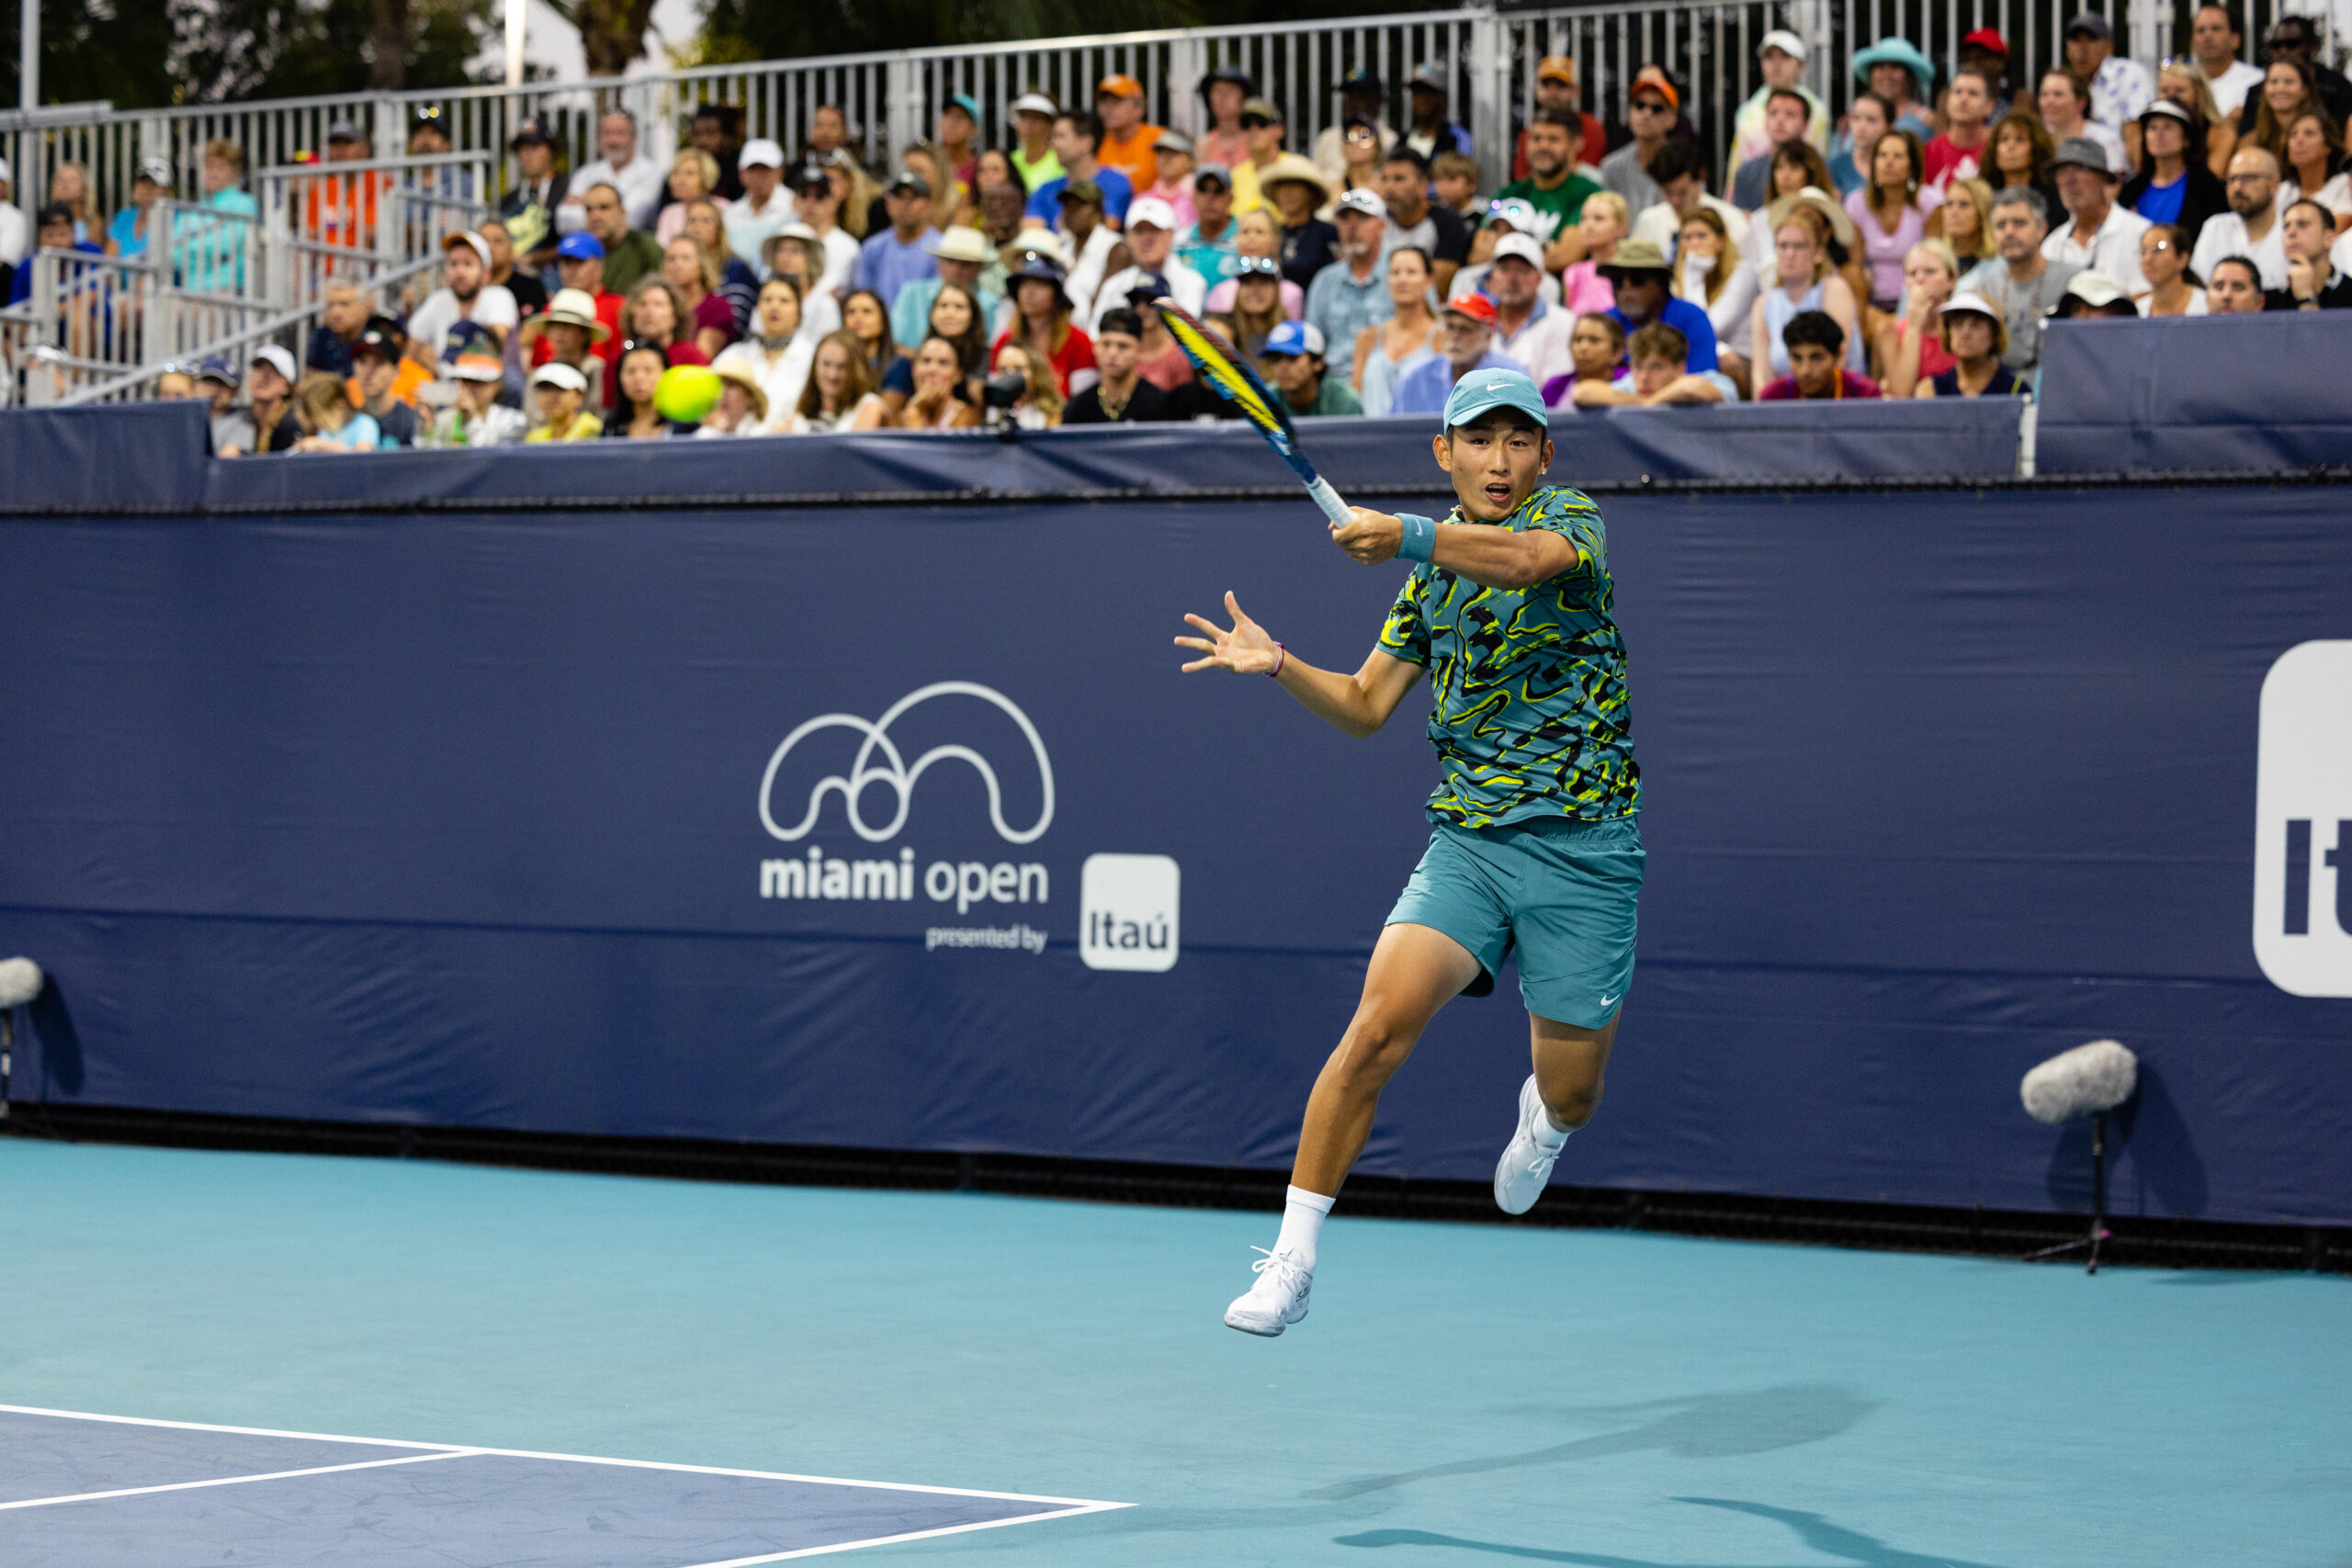 Juncheng Shang gets off the ground to hit a forehand at the 2023 Miami Open